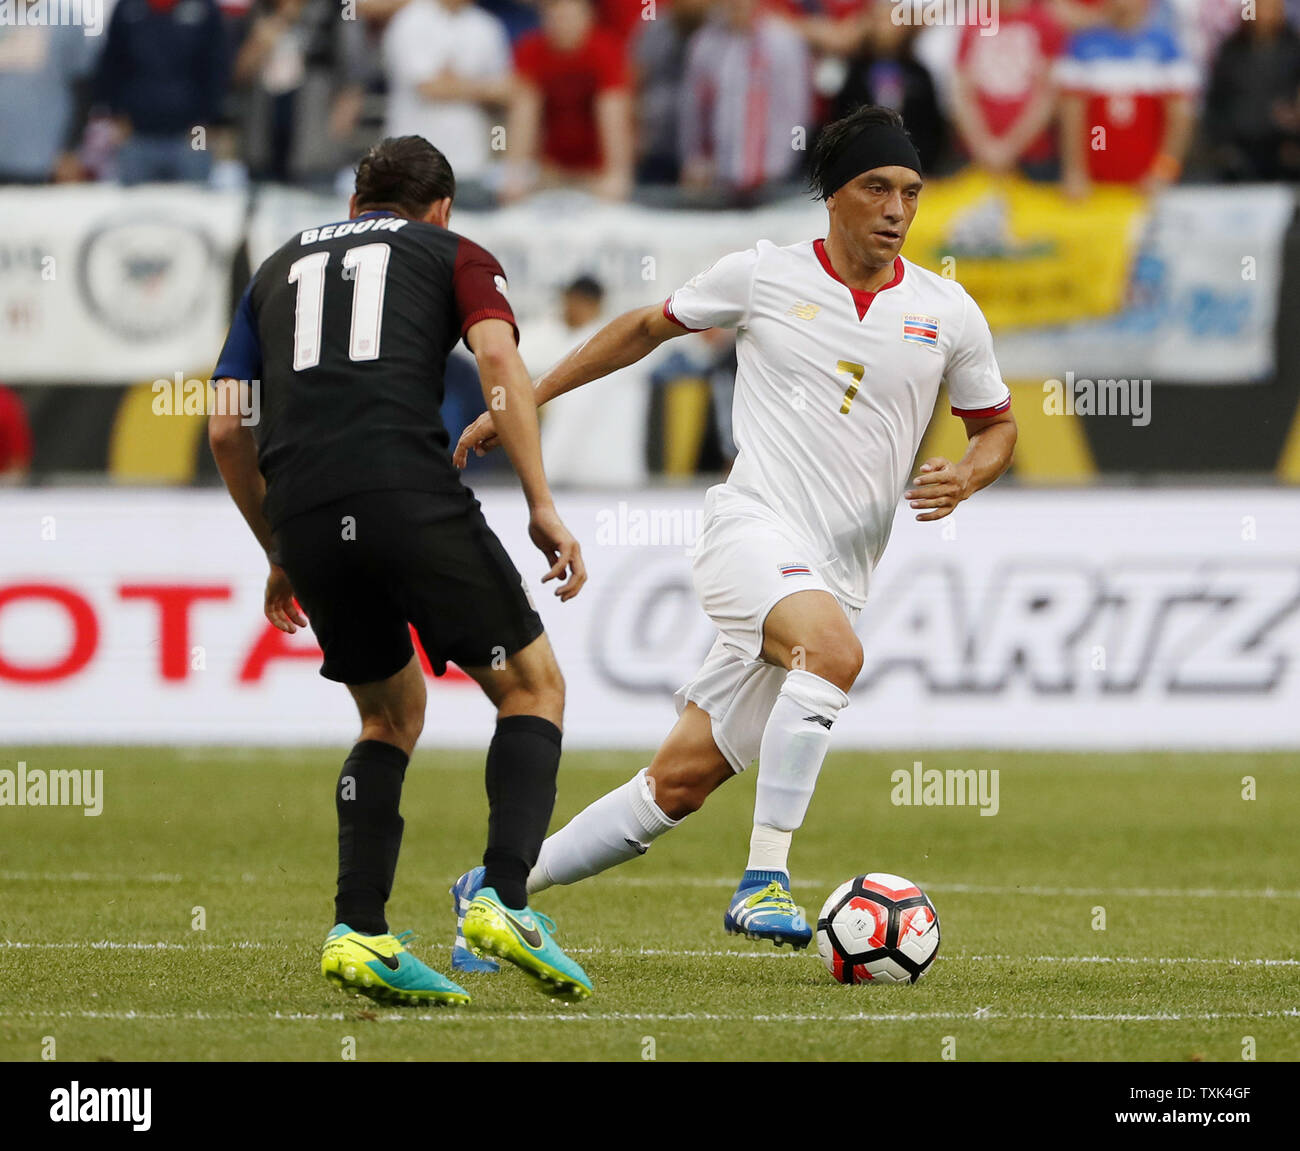 Costa Rica midfielder Christian Bolanos (R) moves the ball as United States midfielder Alejandro Bedoya defends during the first half of a 2016 Copa America Centenario Group A match at Soldier Field in Chicago on June 7, 2016. The United States defeated Costa Rica 4-0.     Photo by Brian Kersey/UPI Stock Photo